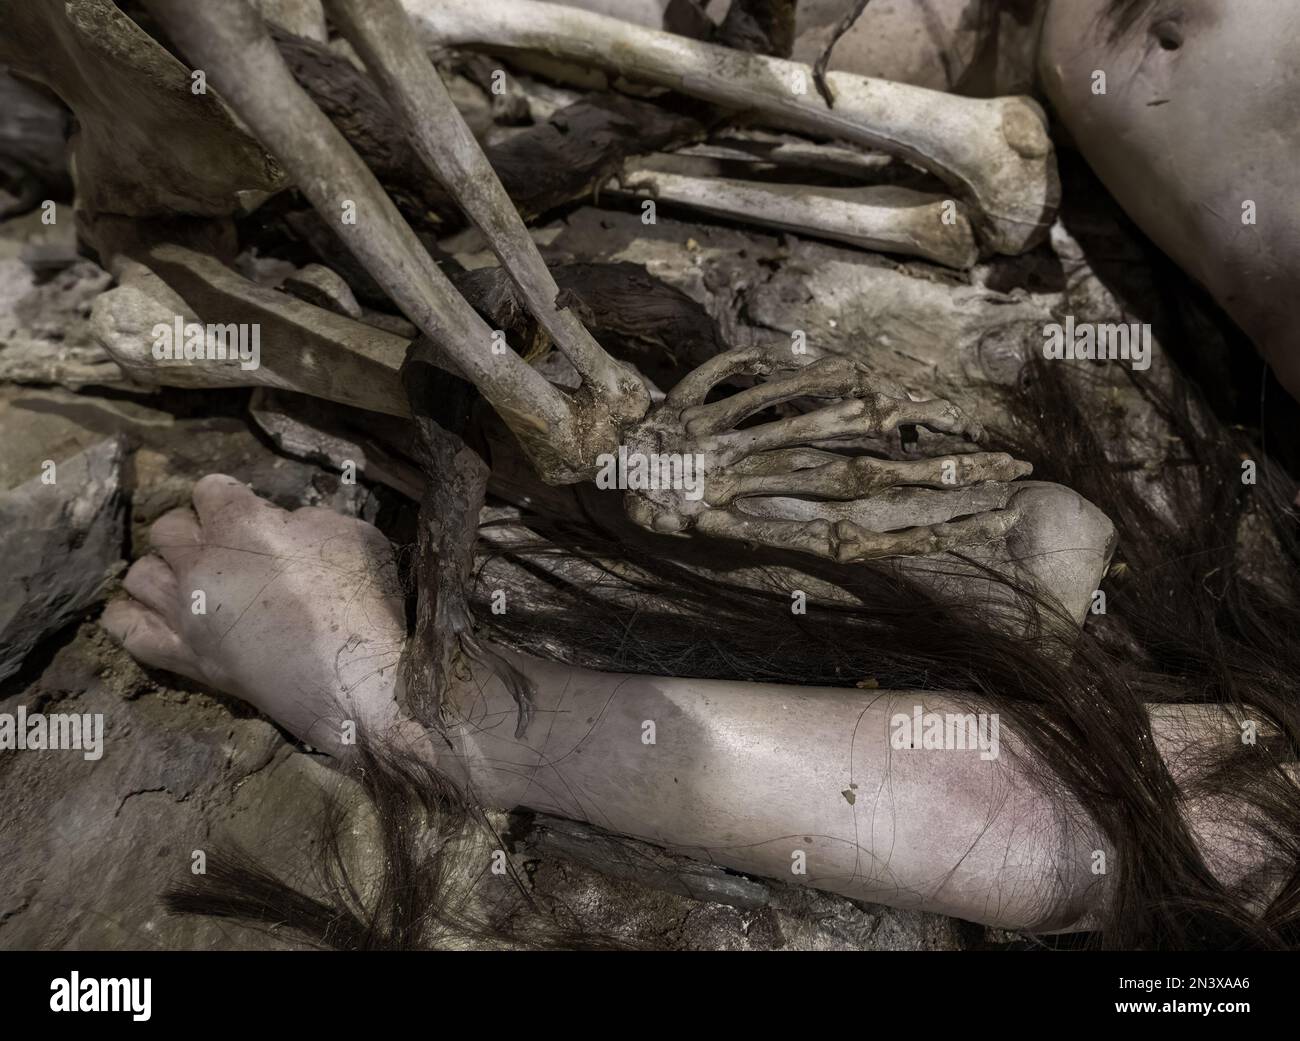 Detail of exhibition of human limbs, anatomy and modern art Stock Photo